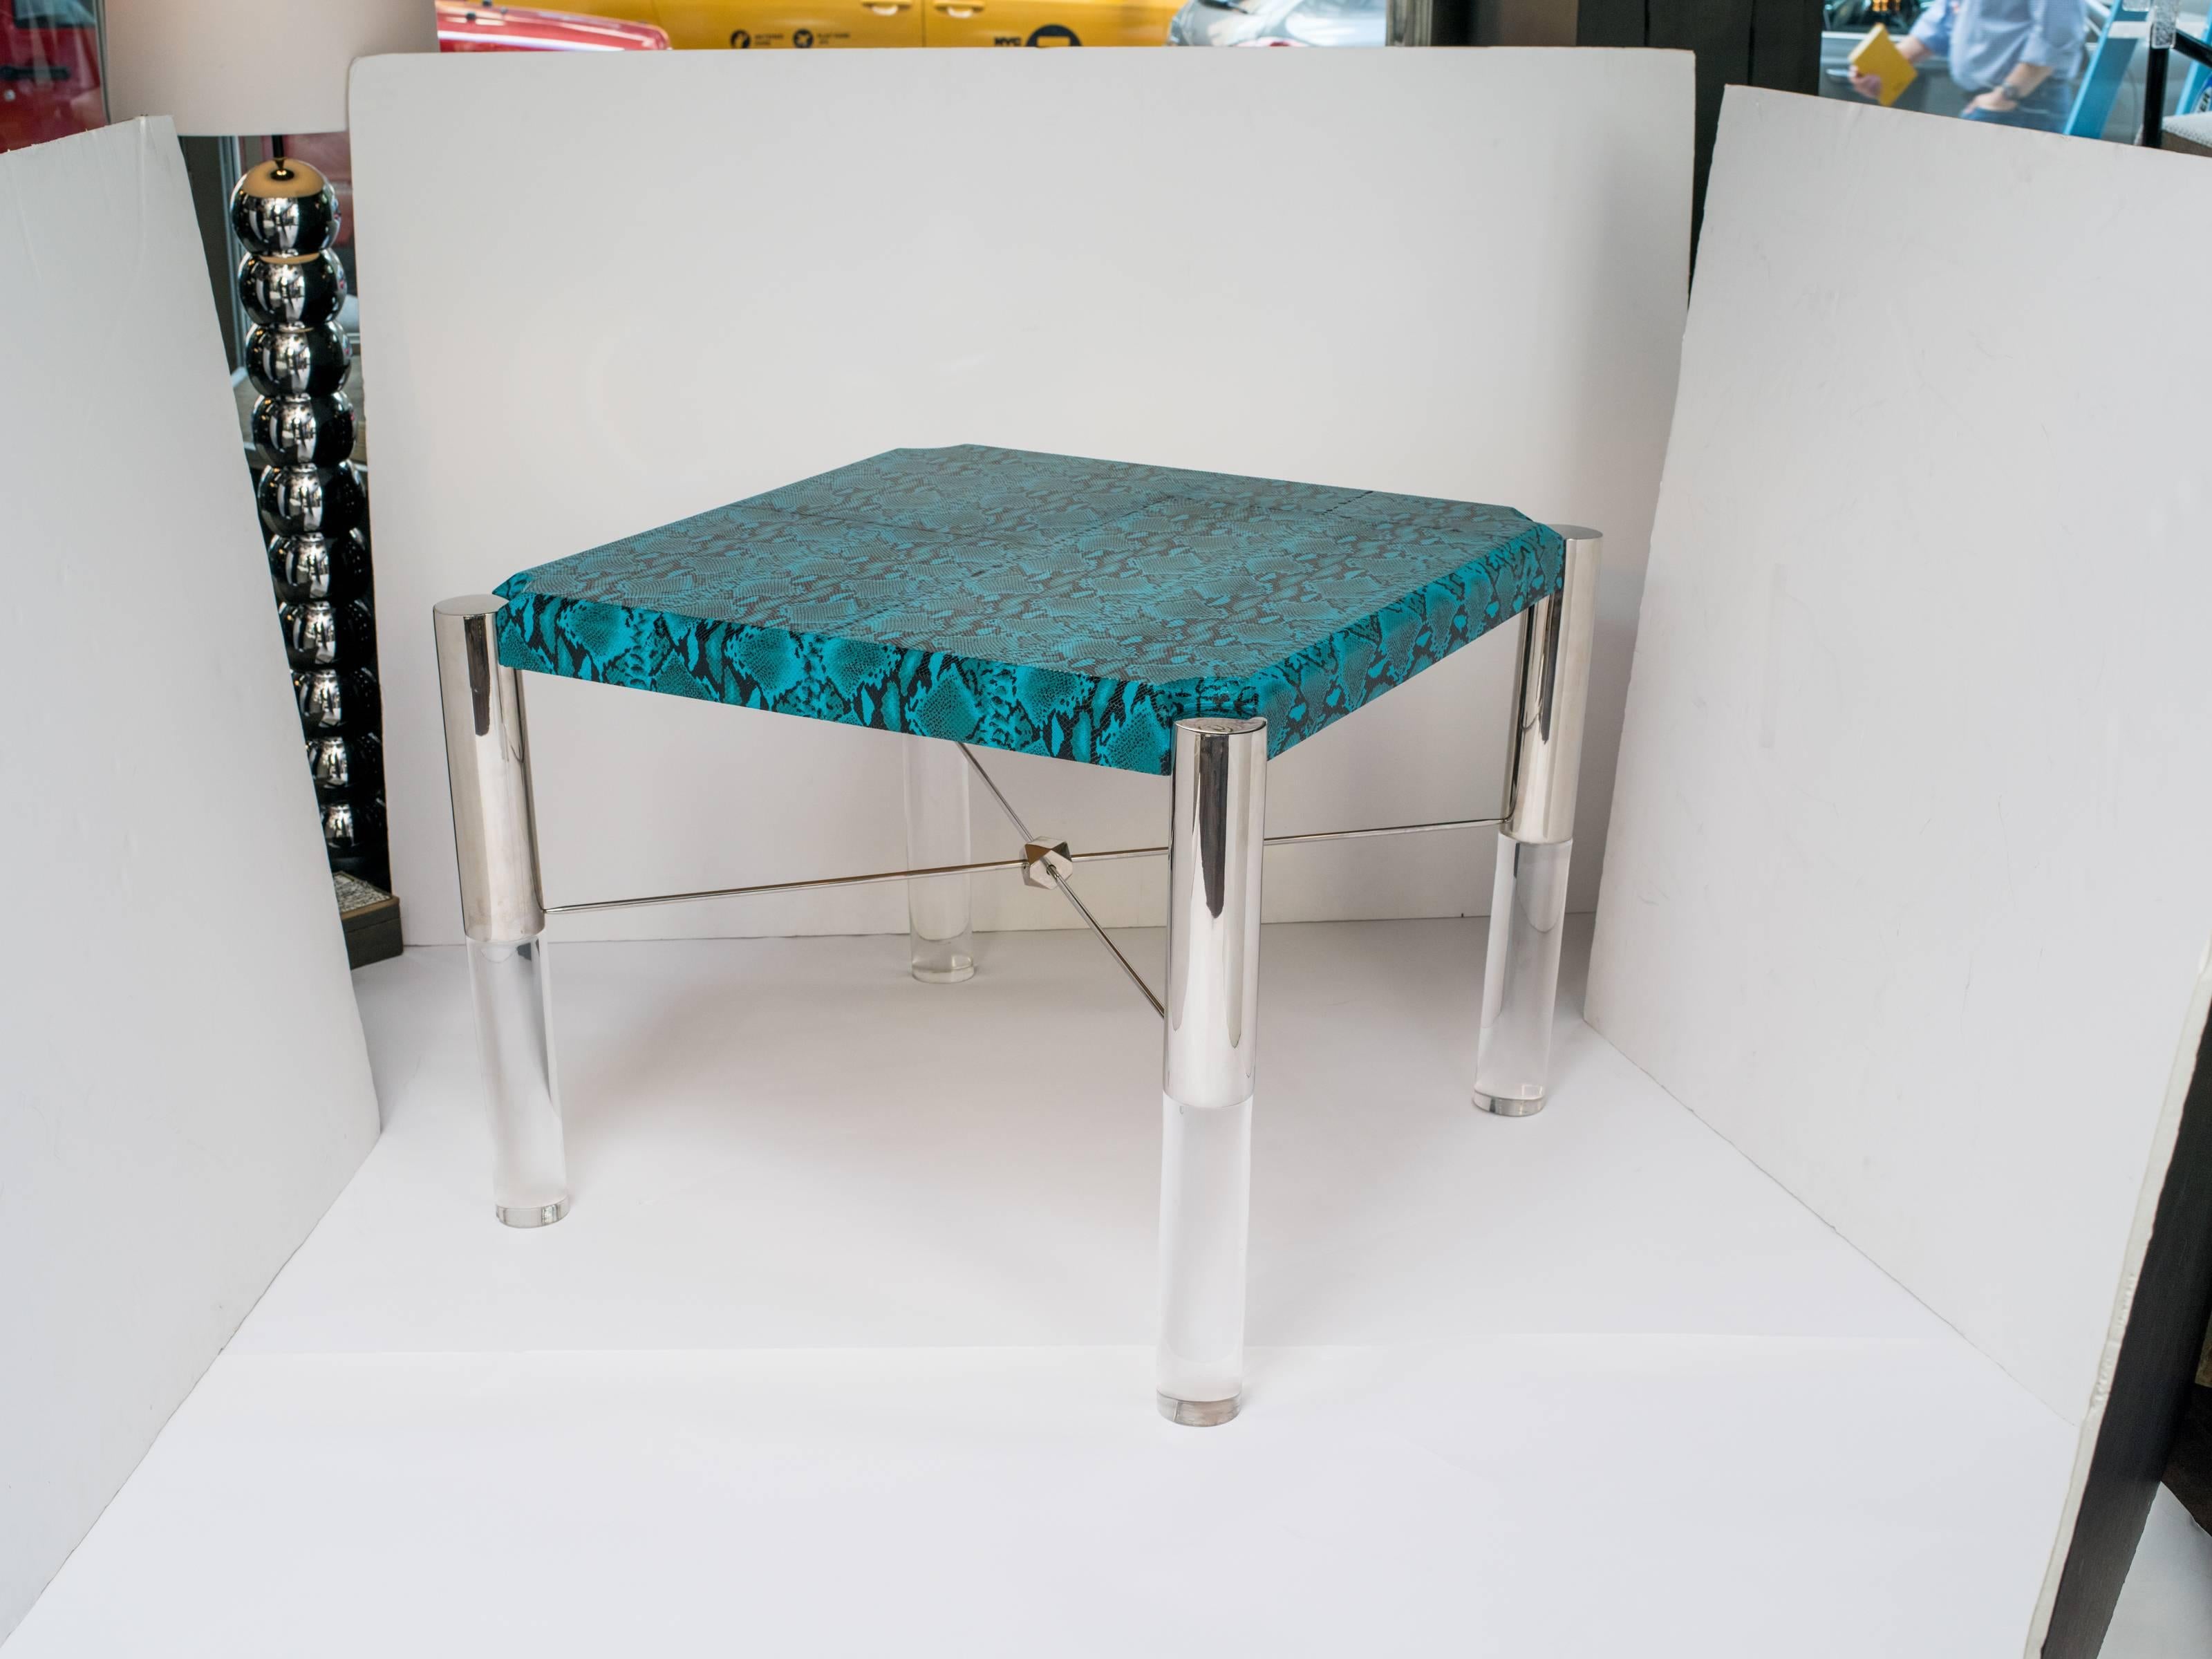 Stunning mid-century modern game table in vibrant turquoise leather with embossed faux python. Square table with shield top design. Cylinder legs are comprised of gunmetal finish and solid lucite. Fitted with X base crossbars held by a geometric